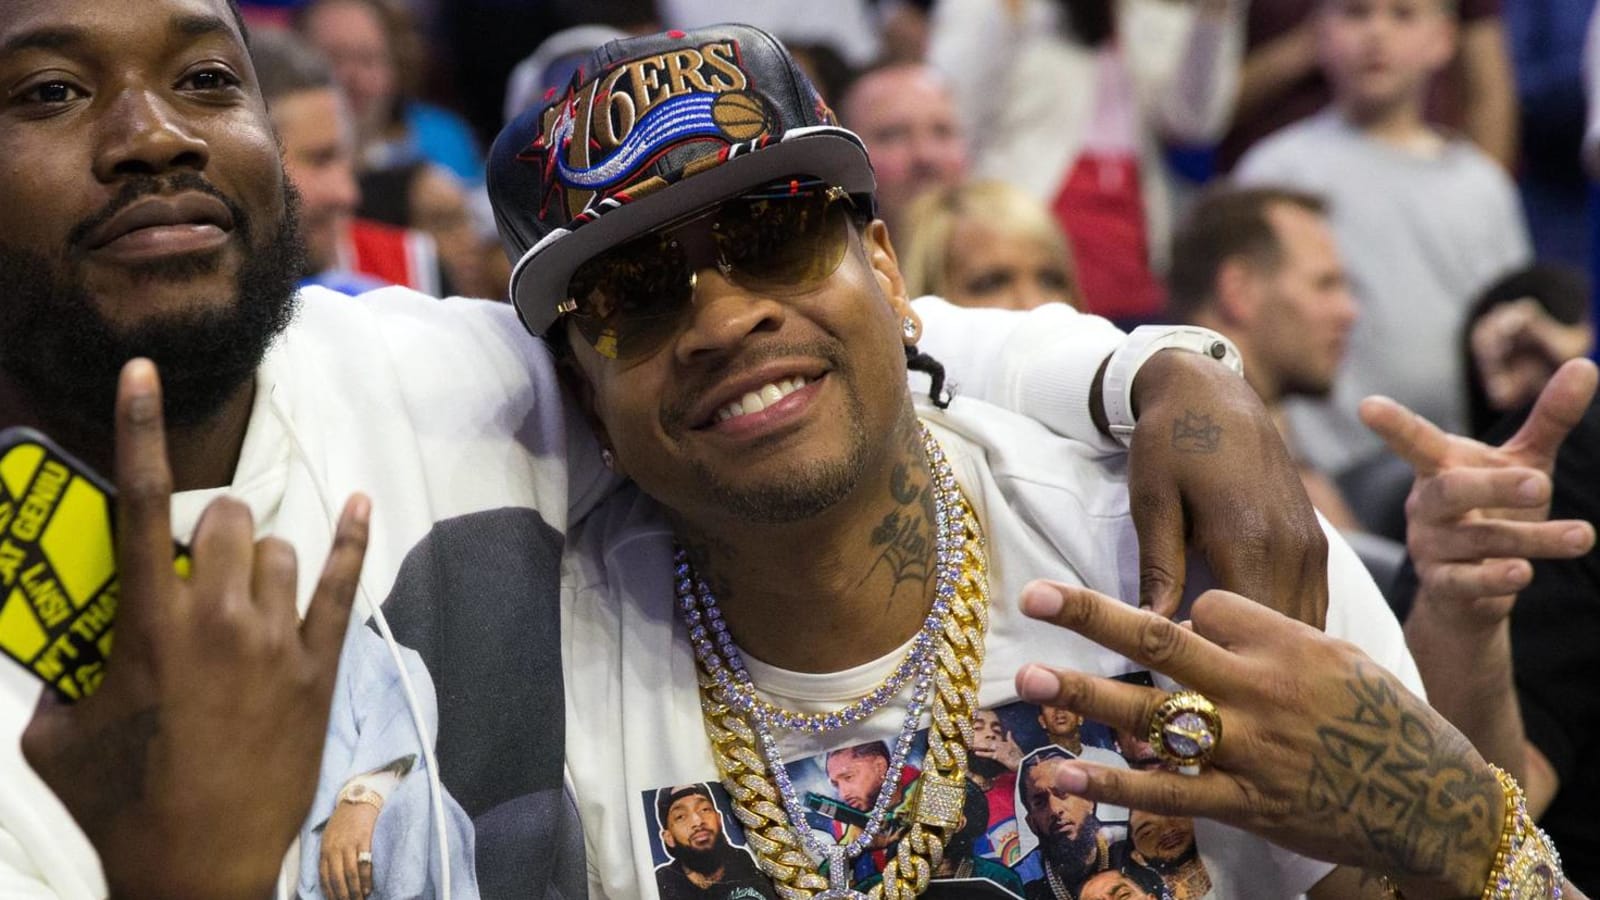 Allen Iverson, already a 76ers legend, solidifies his status as